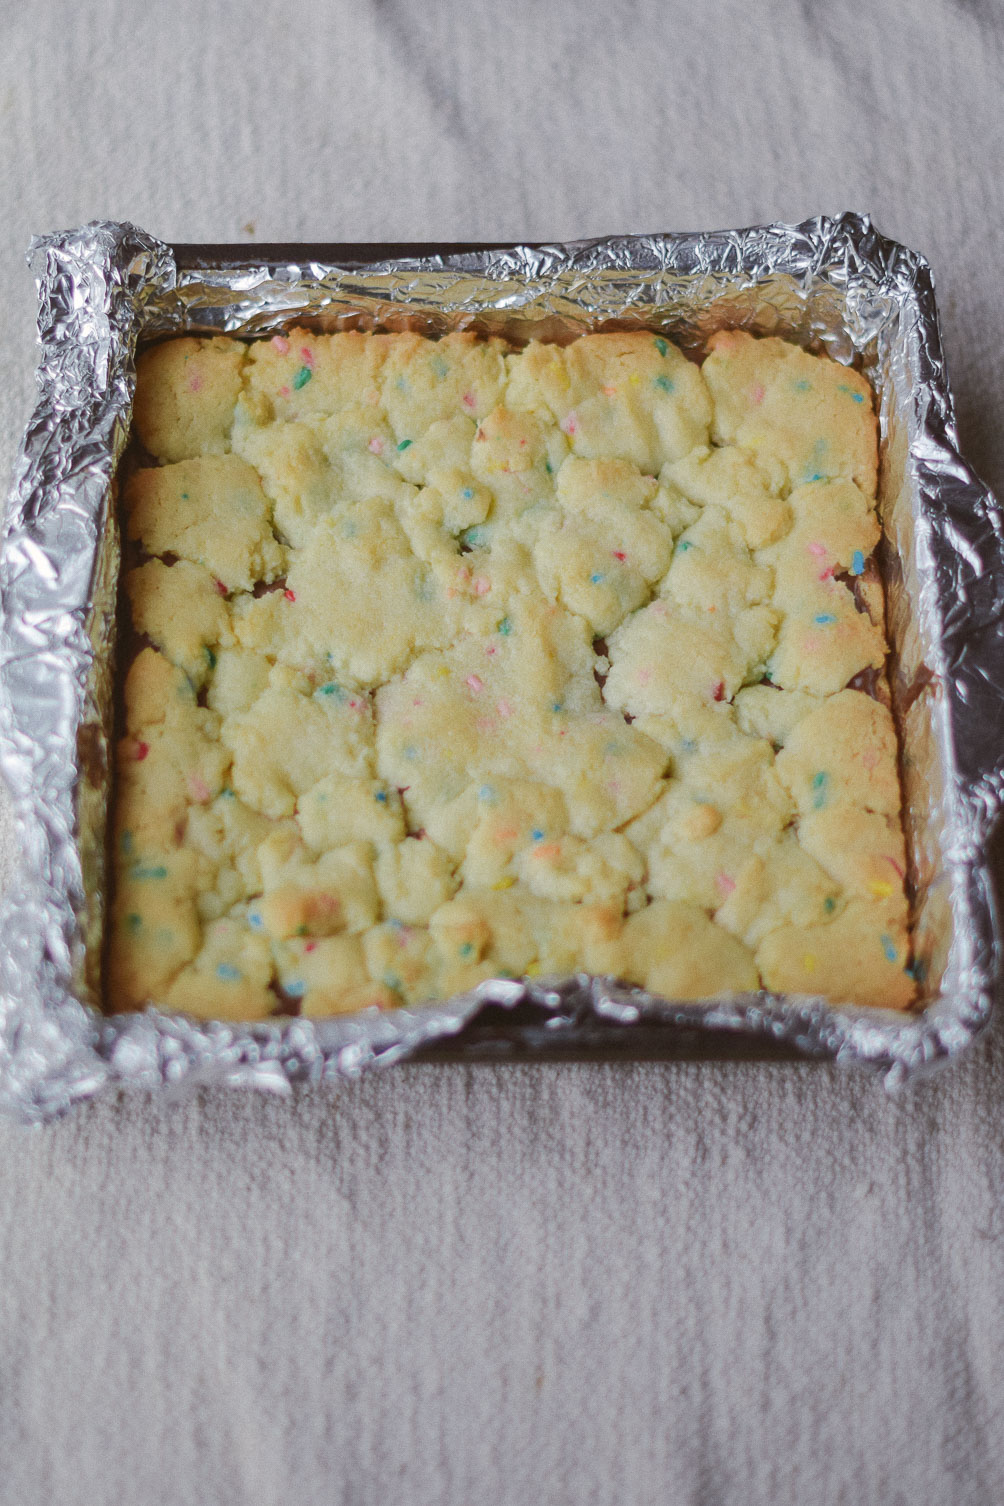 cooking up an easy spring dessert recipe for nutella crumble funfetti cake bars